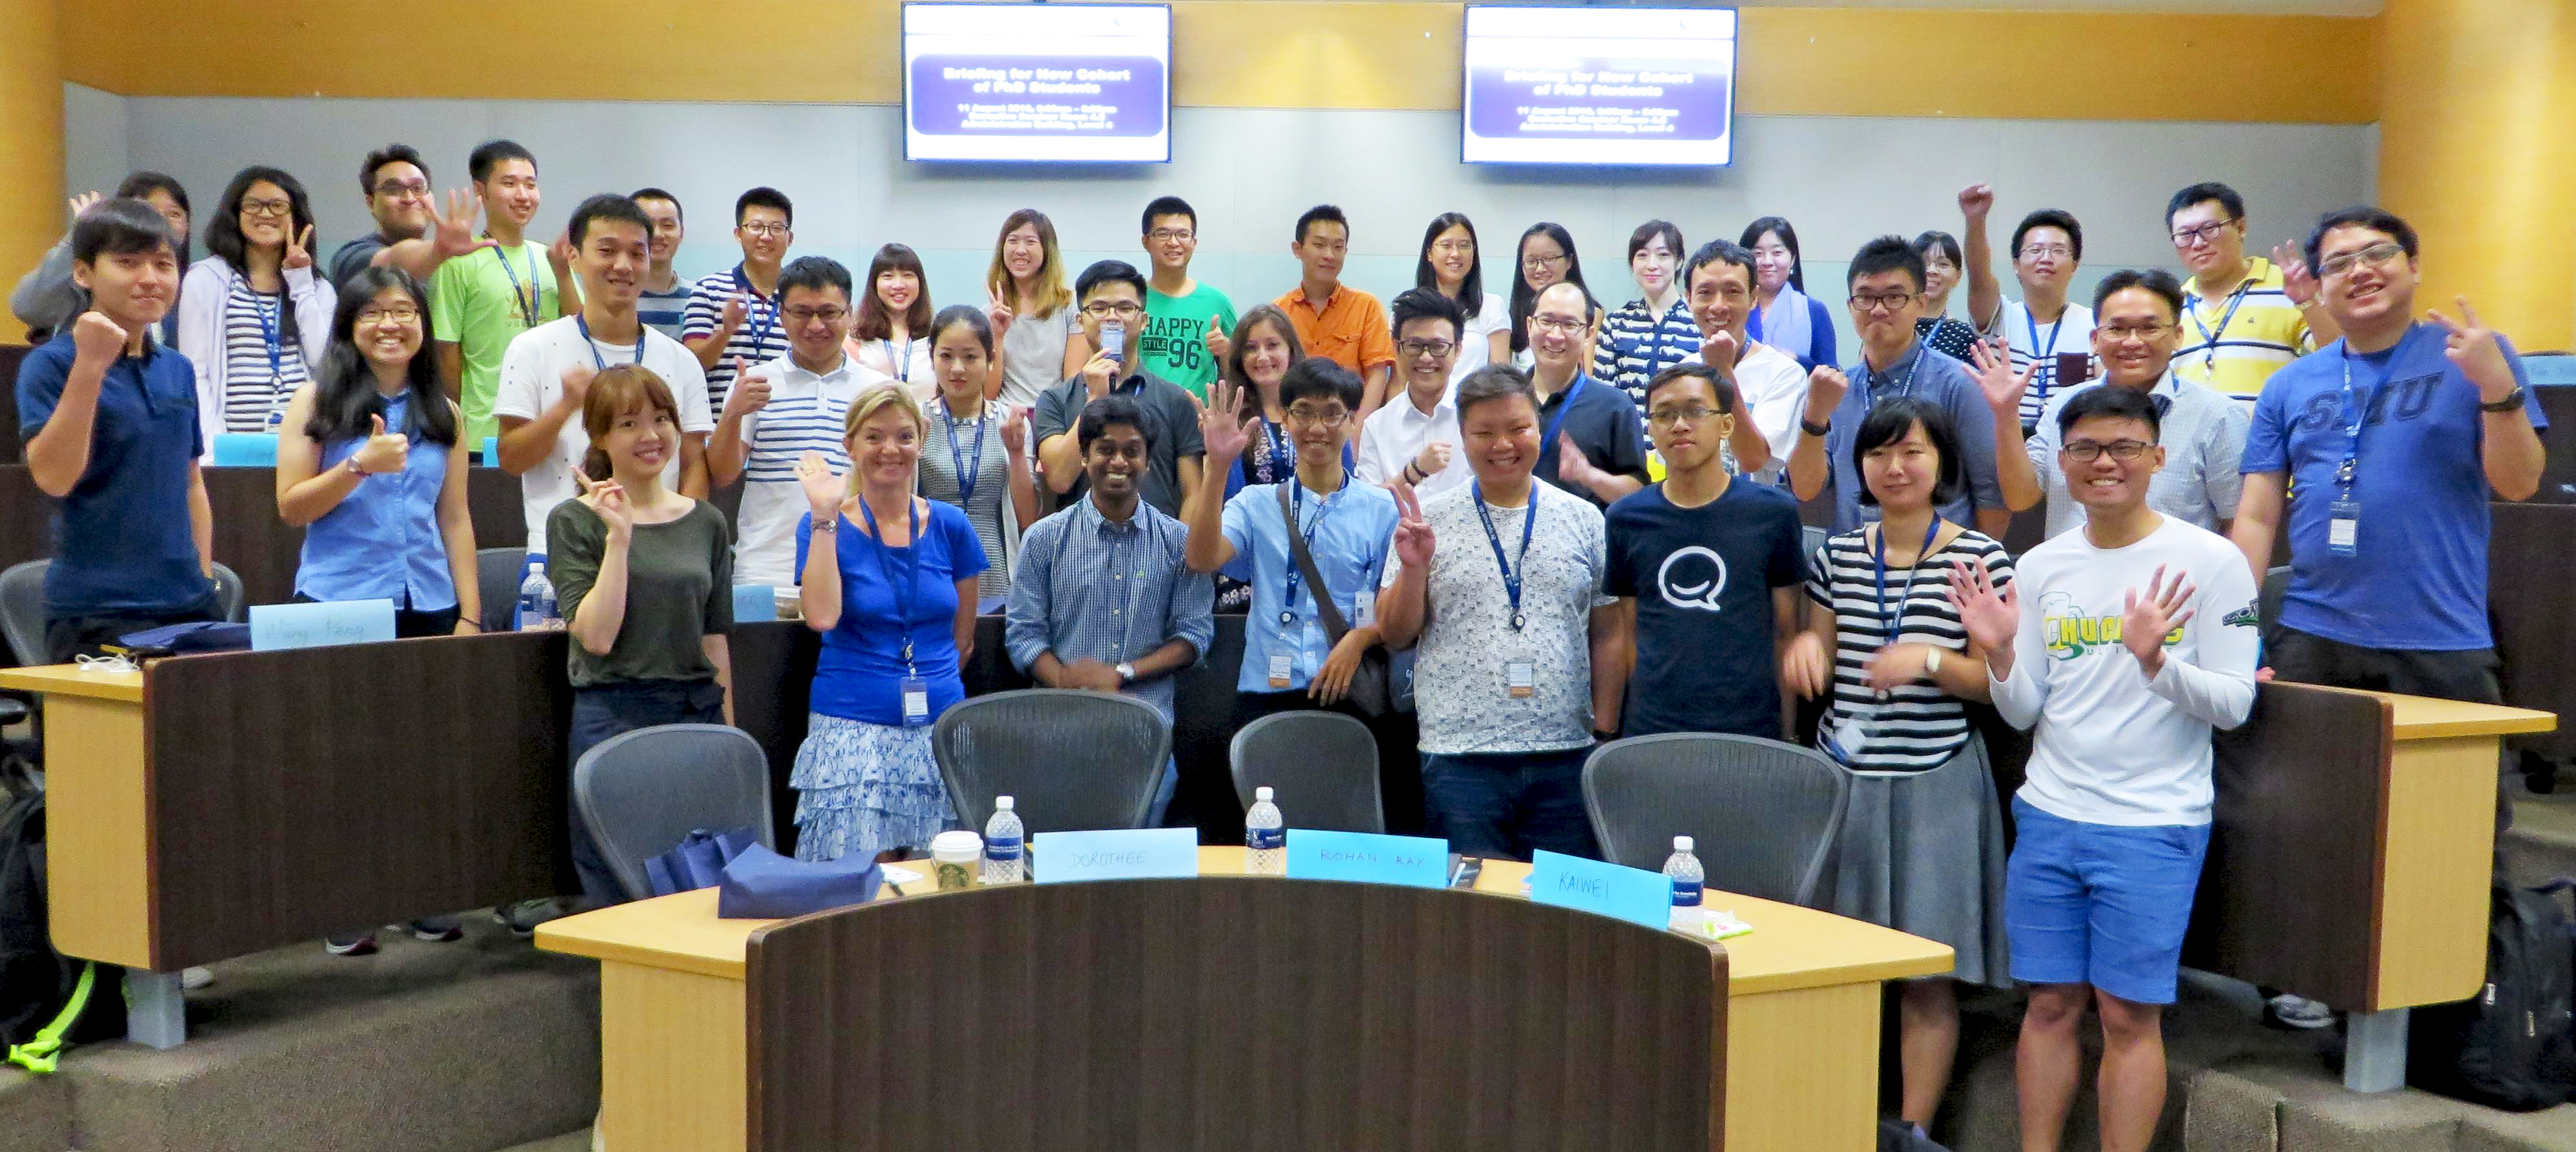 First-year SMU PhD students and future thought leaders celebrate the start of their new journeys